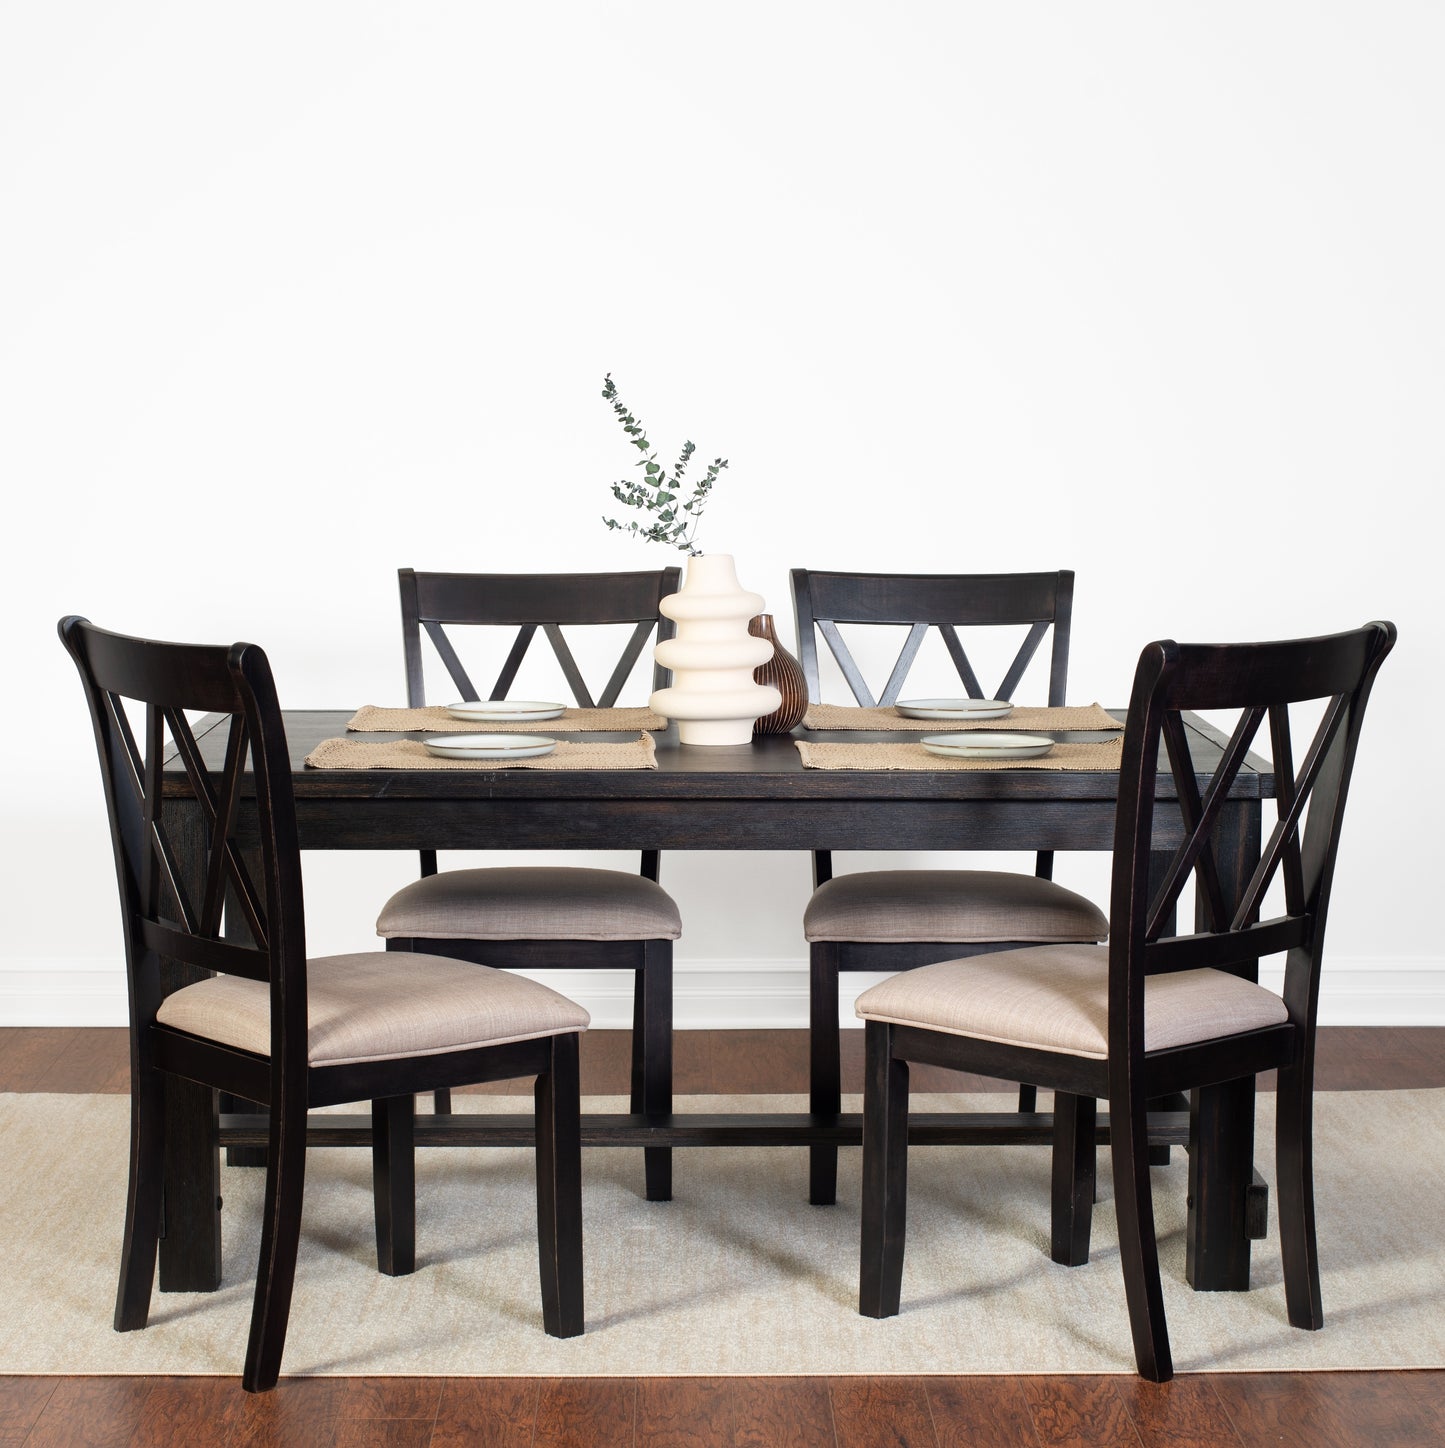 Hensfield Contemporary 5-Piece Dining Set, Dining Table with 4 Cross-back Chairs, Rich Black